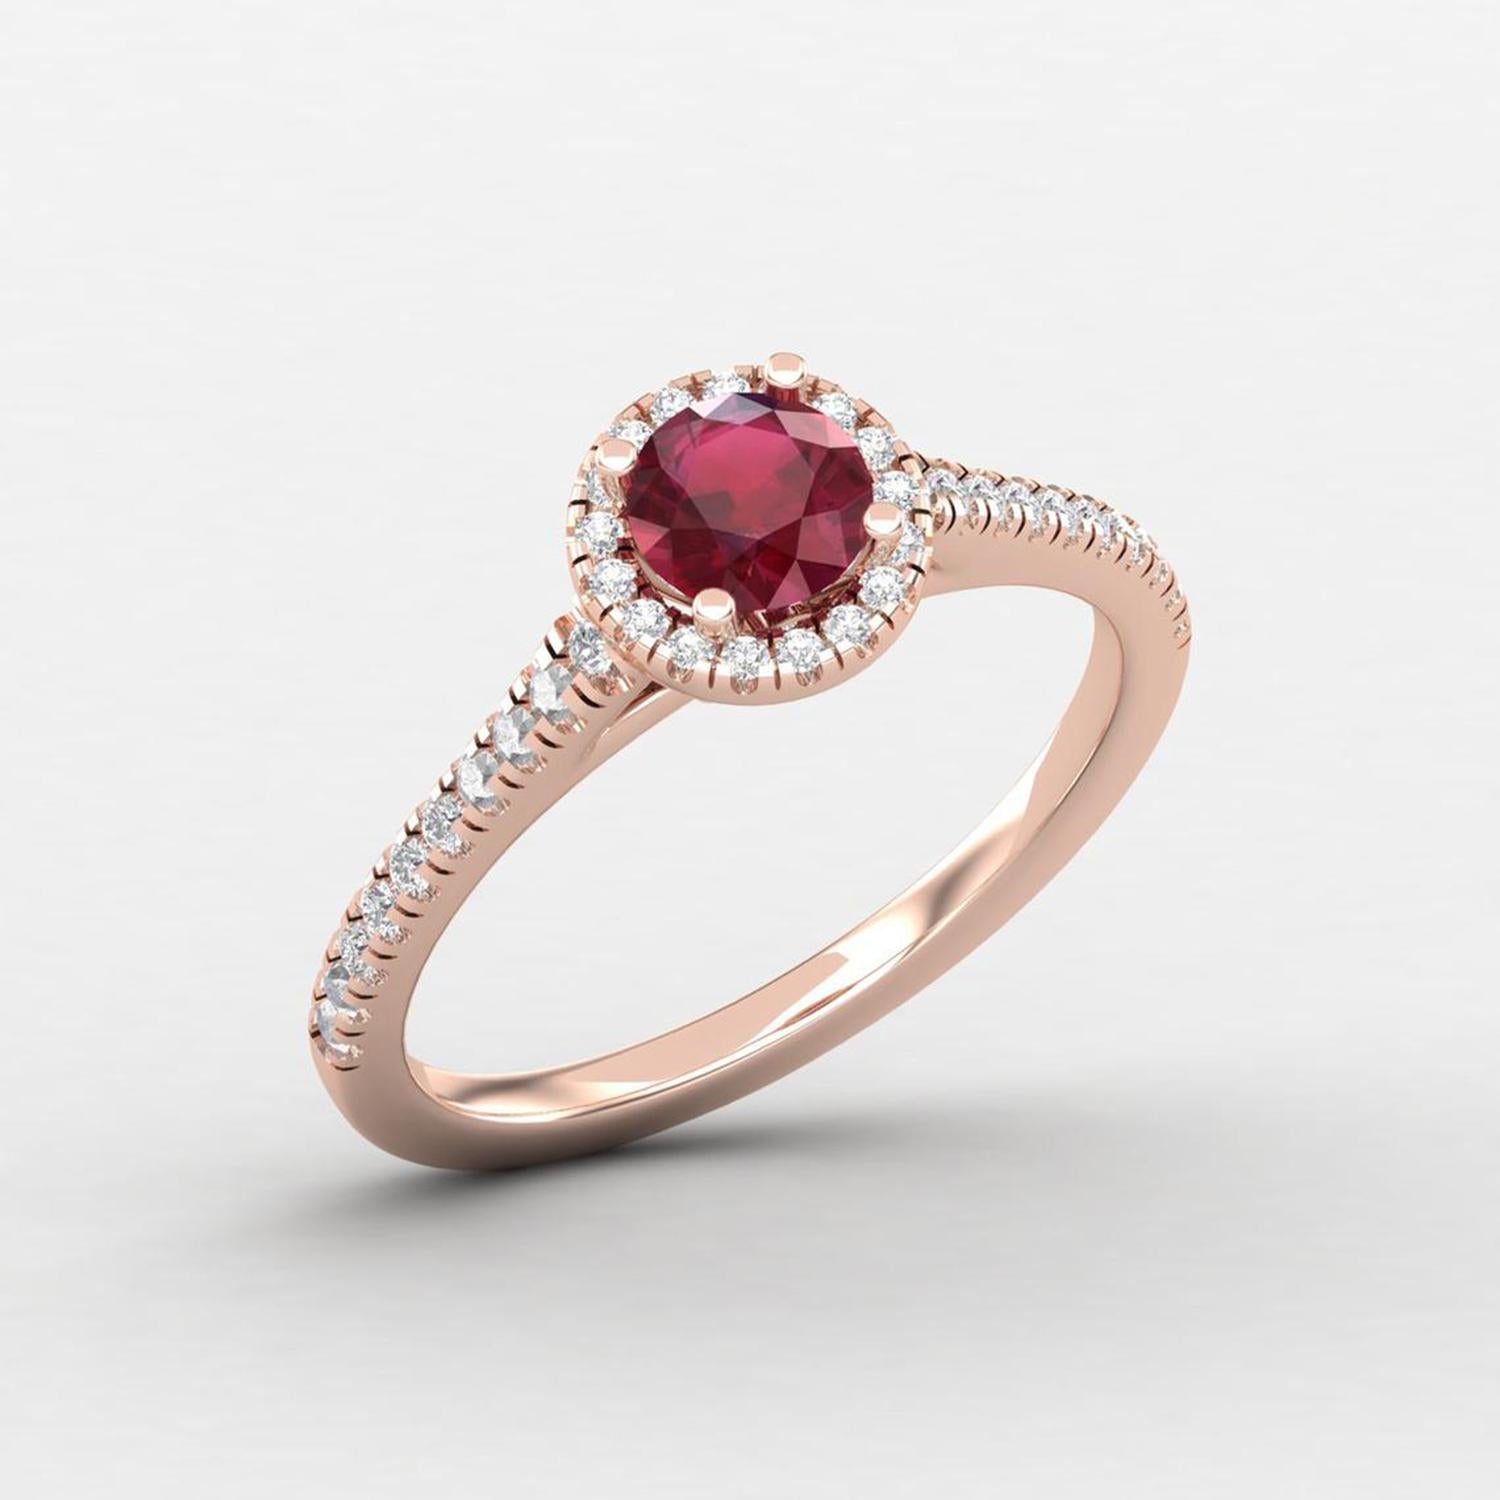 Modern 14 Karat Gold Ruby Ring / Round Diamond Ring / Solitaire Ring For Sale